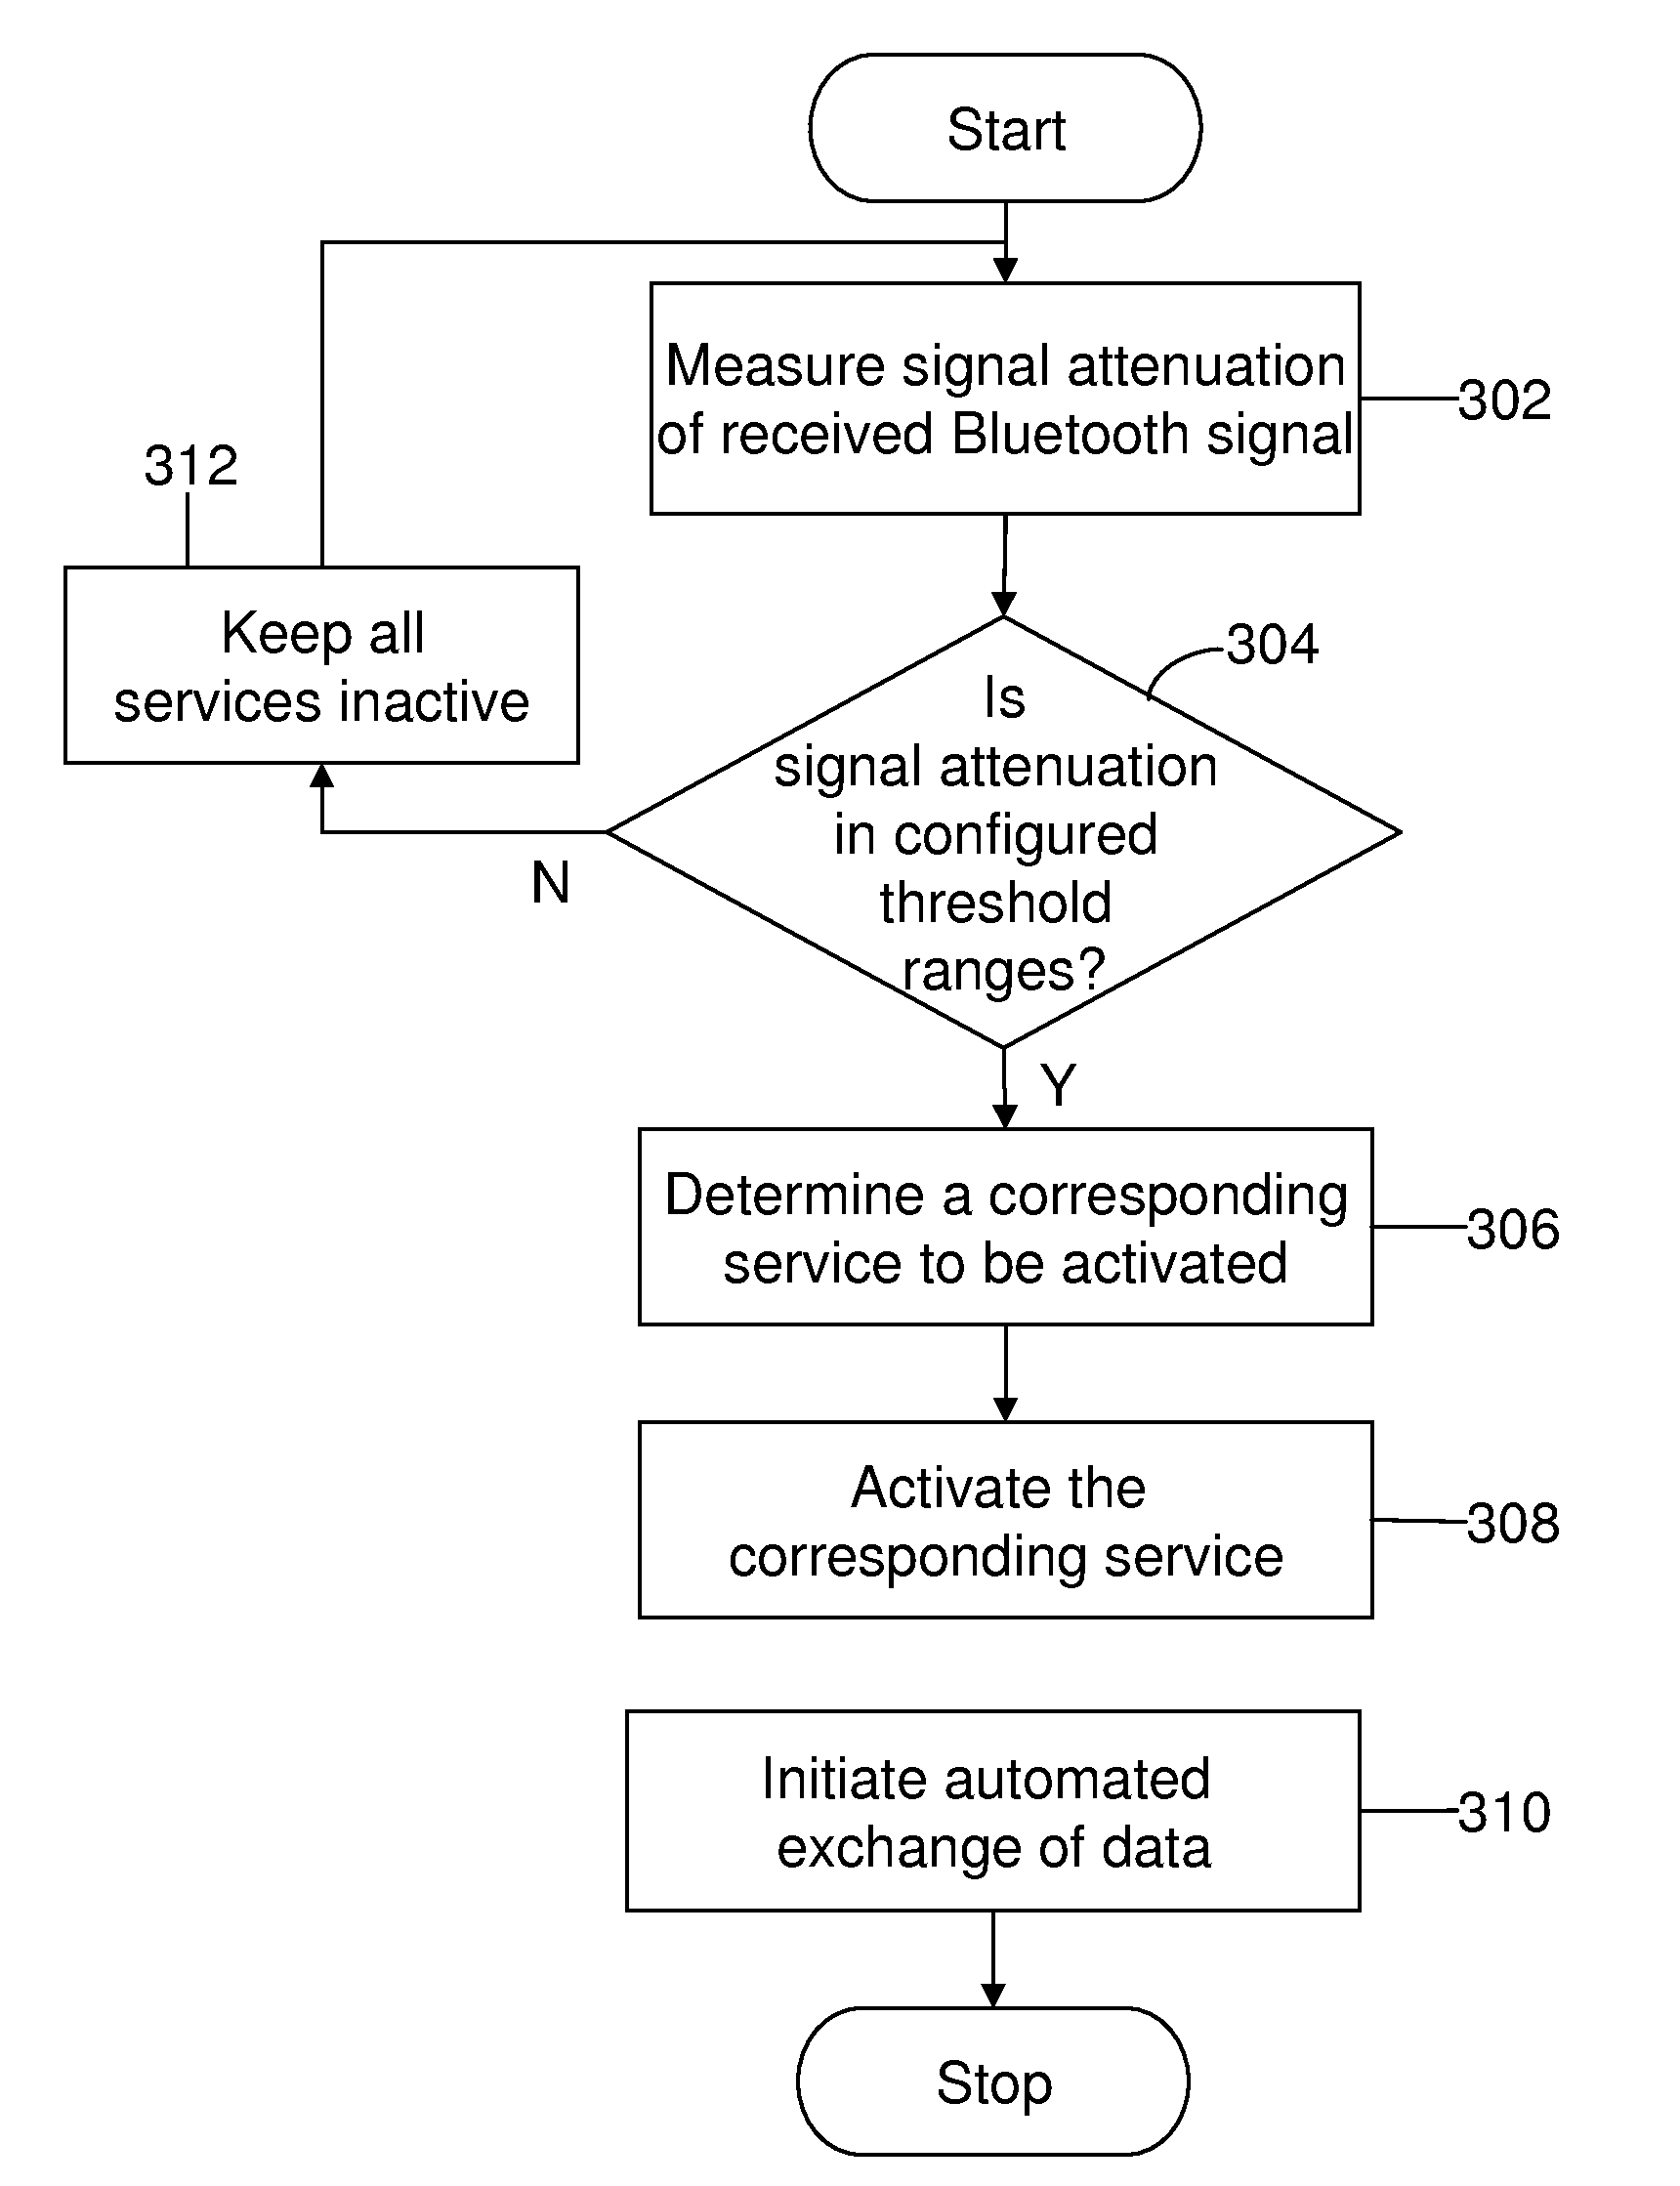 Method and system for enabling discovery of services and automated exchange of data between bluetooth devices